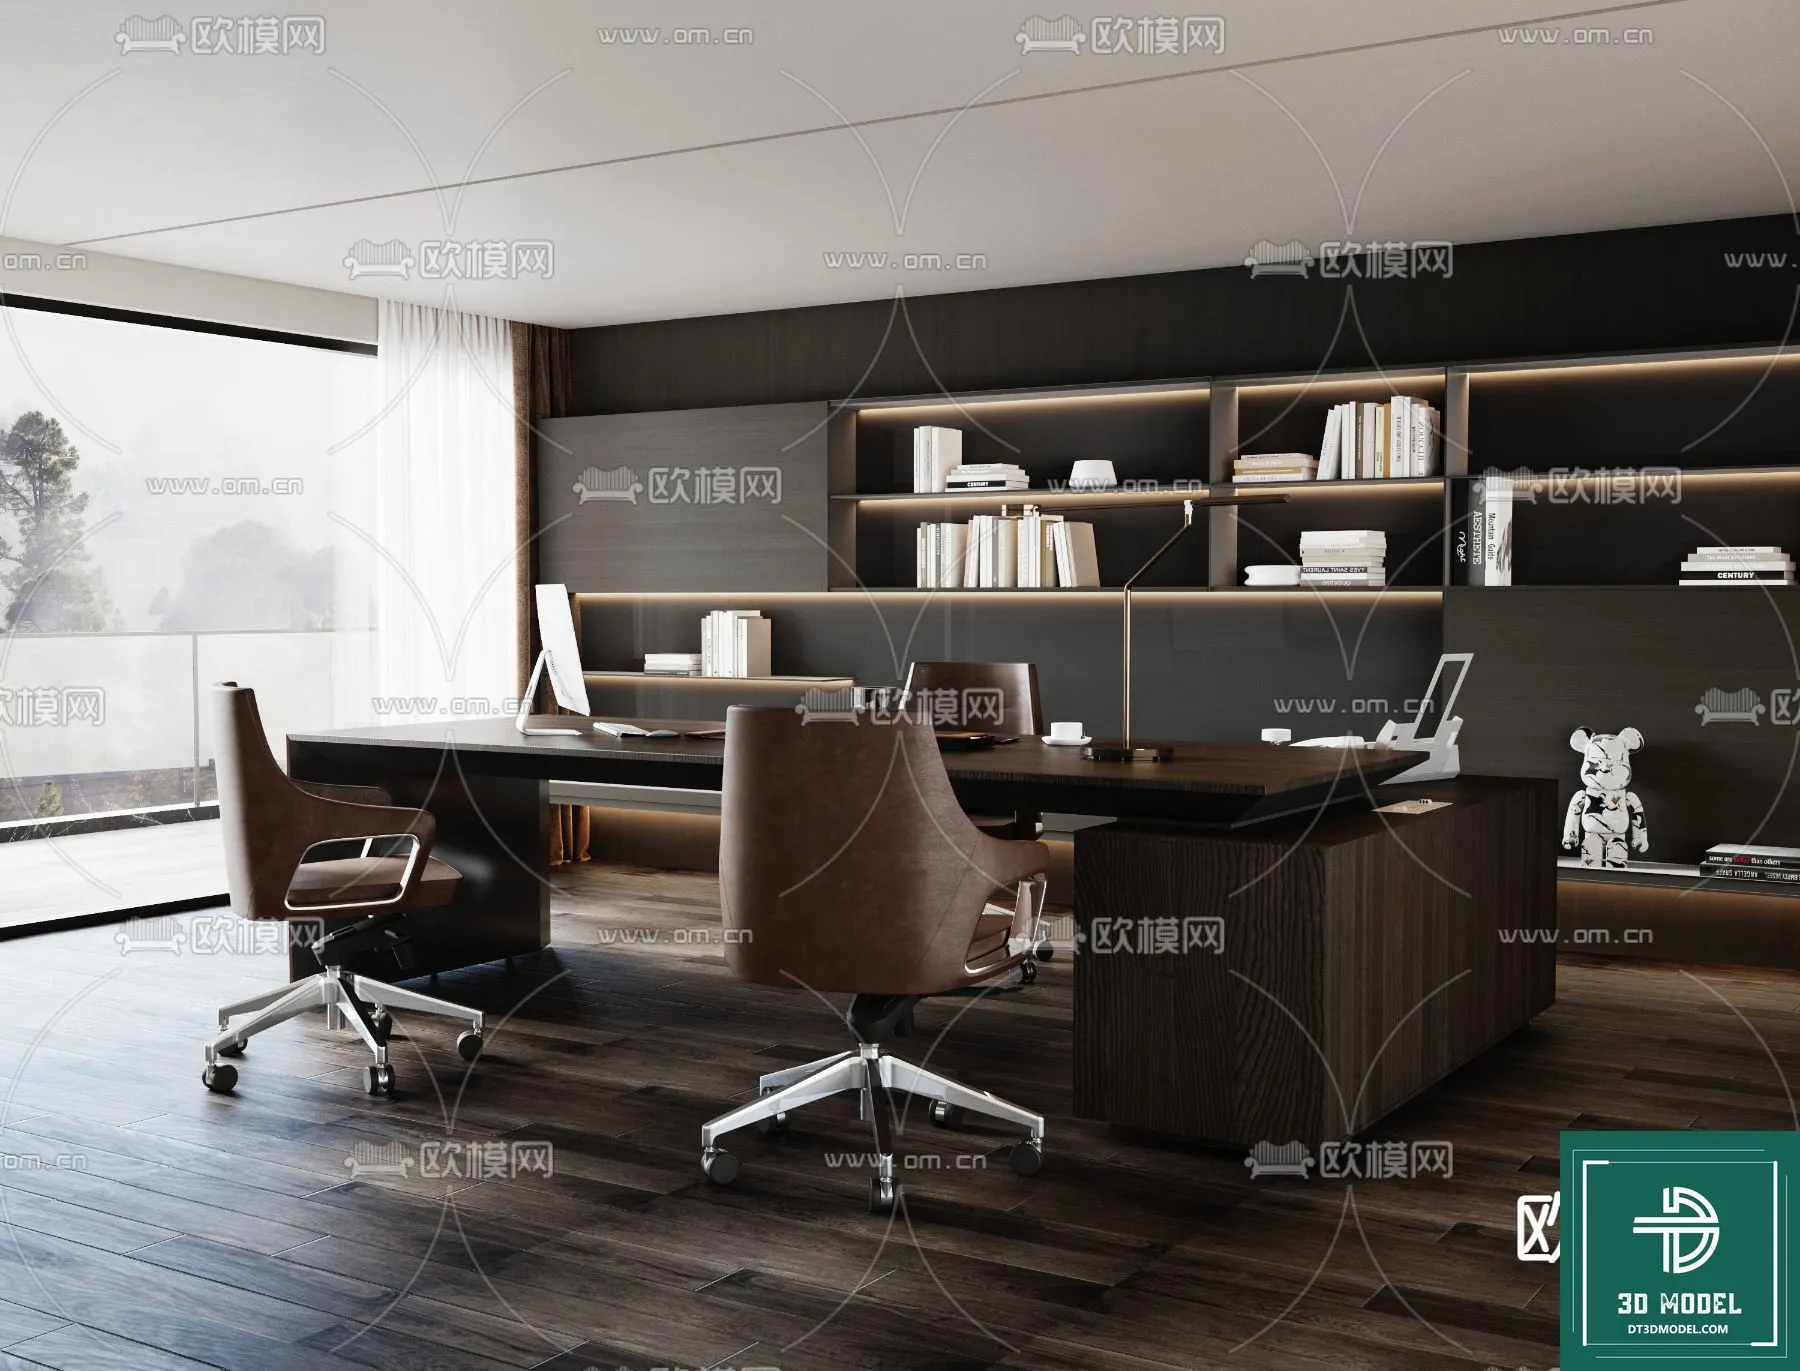 OFFICE ROOM FOR MANAGER – 3DMODEL – 067